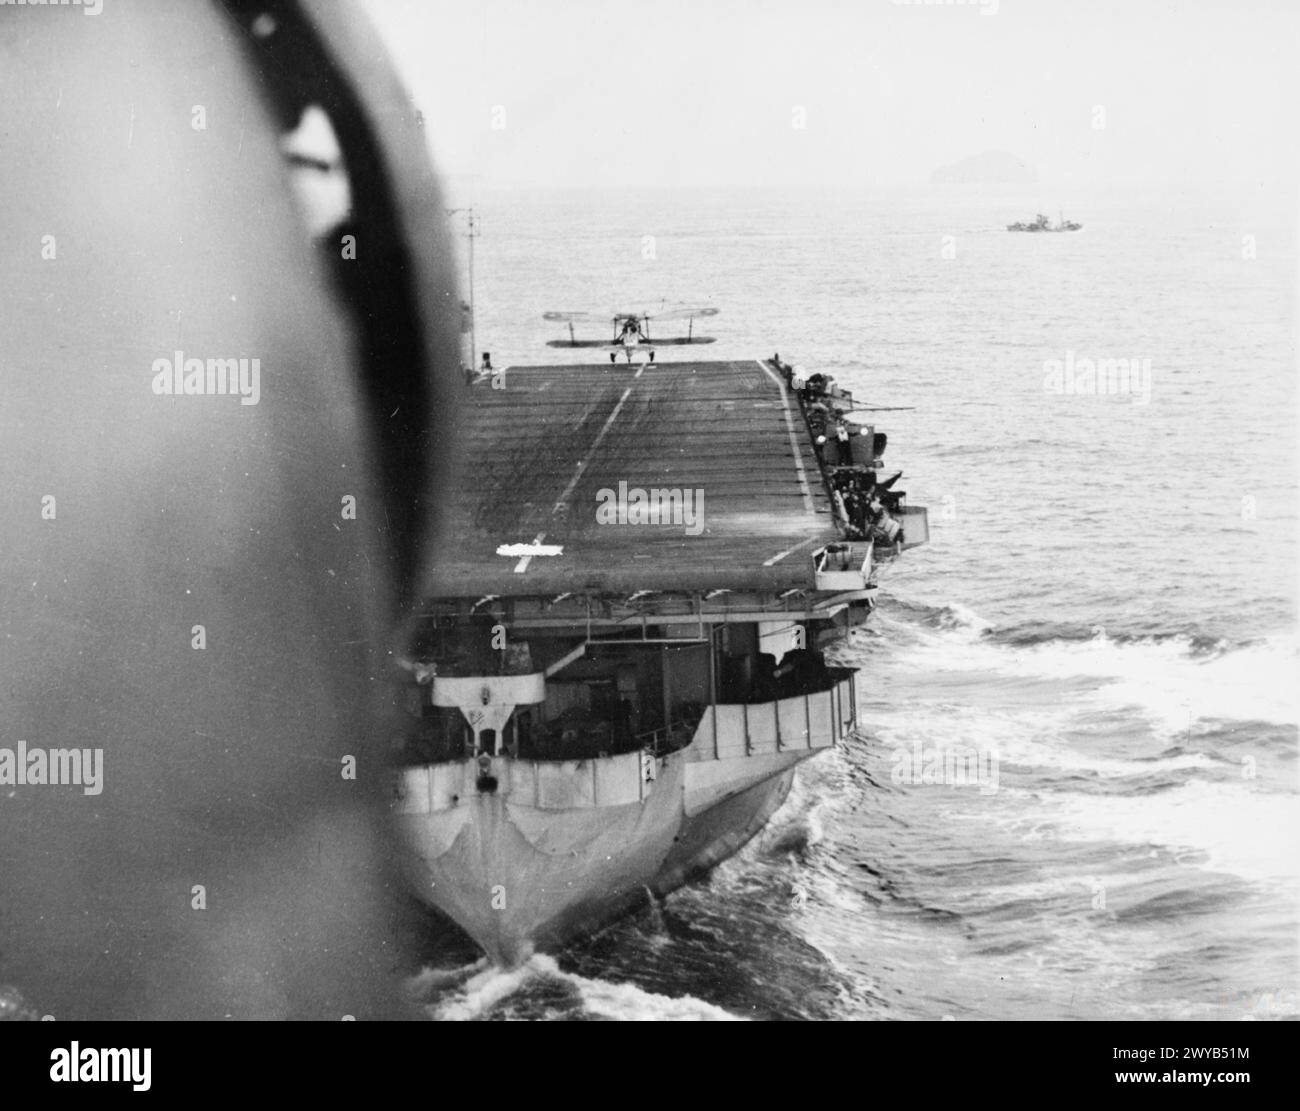 WITH THE ESCORT CARRIER HMS SMITER. 1944, AT SEA, ON BOARD A FAIREY SWORDFISH OF THE CARRIER DURING THE TRAINING OF DECK LANDING CONTROL OFFICERS, WHEN AIRCRAFT WERE TAKING OFF AND LANDING ON. - Looking down on the SMITER as a Fairey Swordfish came in to land-on. , Stock Photo